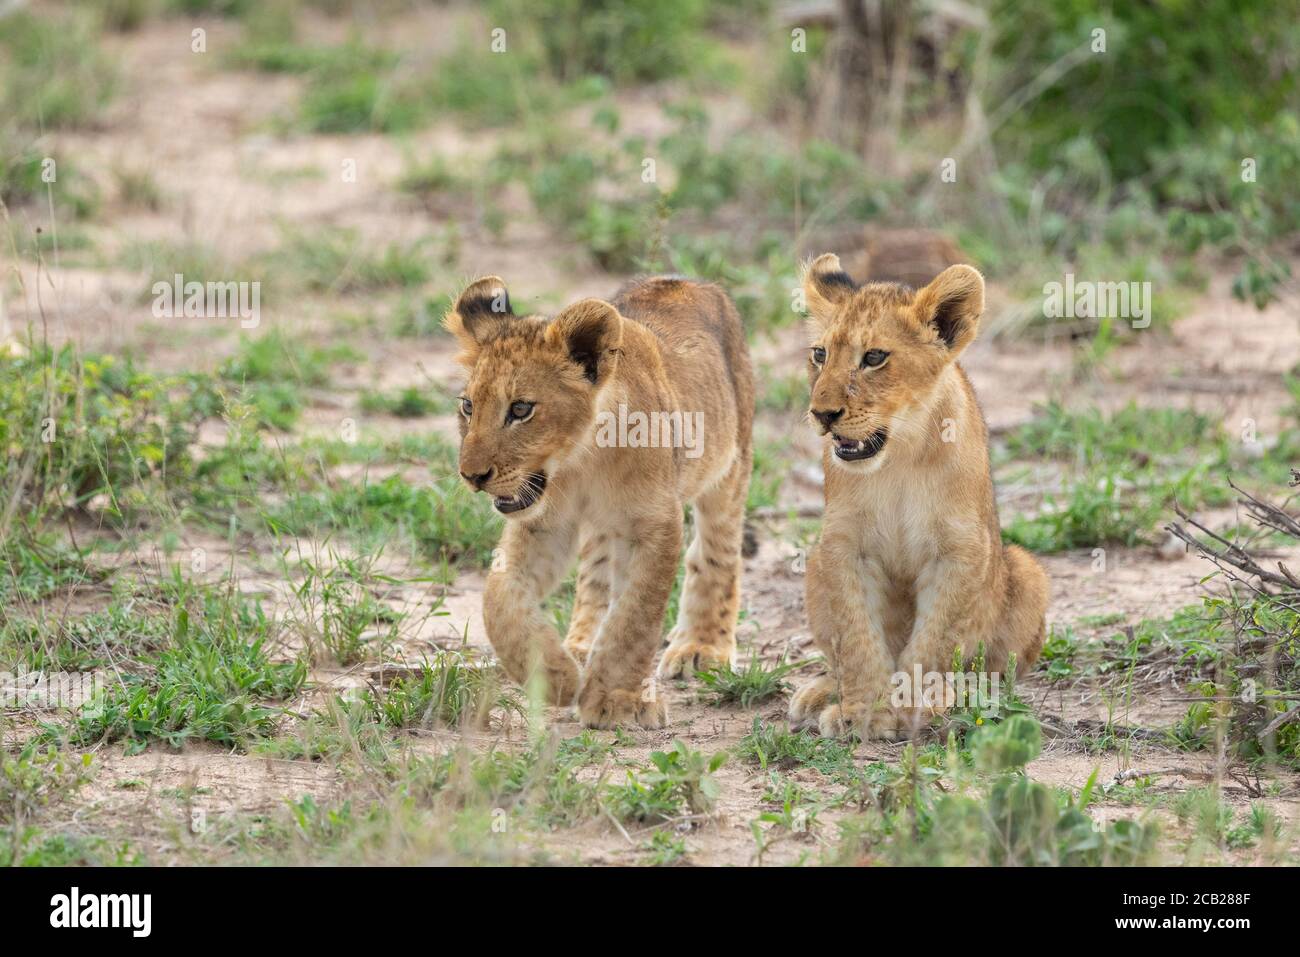 Two young lion cubs looking alert in Kruger Park South Africa Stock Photo